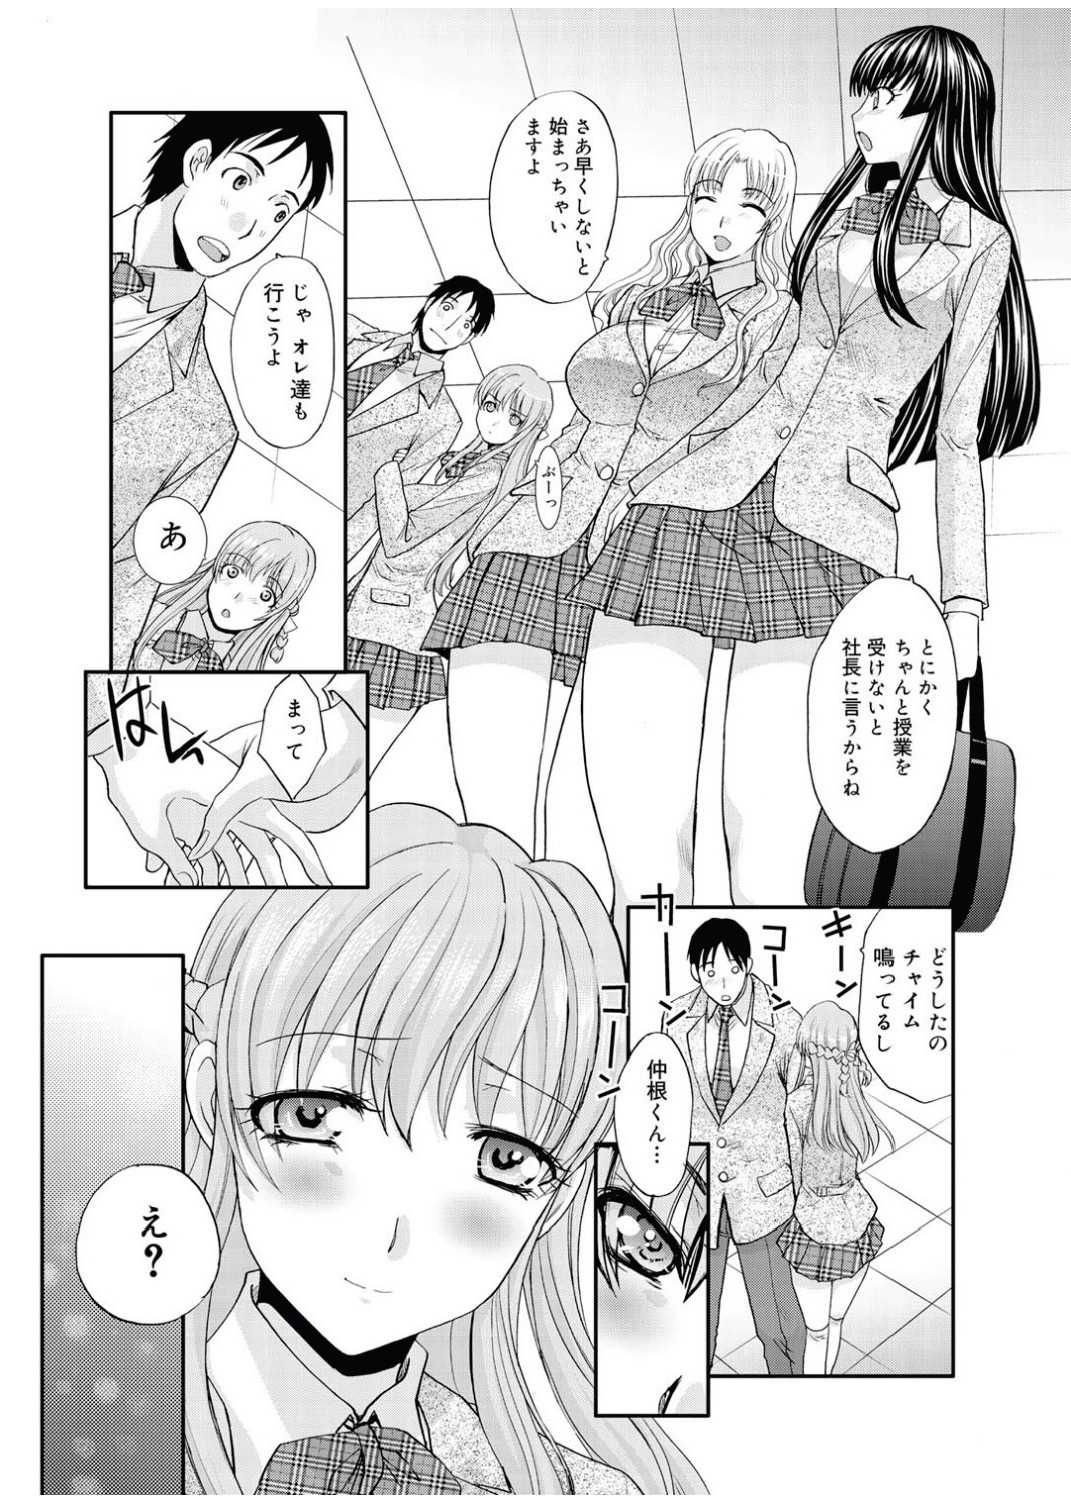 [Itaba Hiroshi] RIN backstage Ch.01-12 (Complete) [板場広志] RIN backstage 全12話